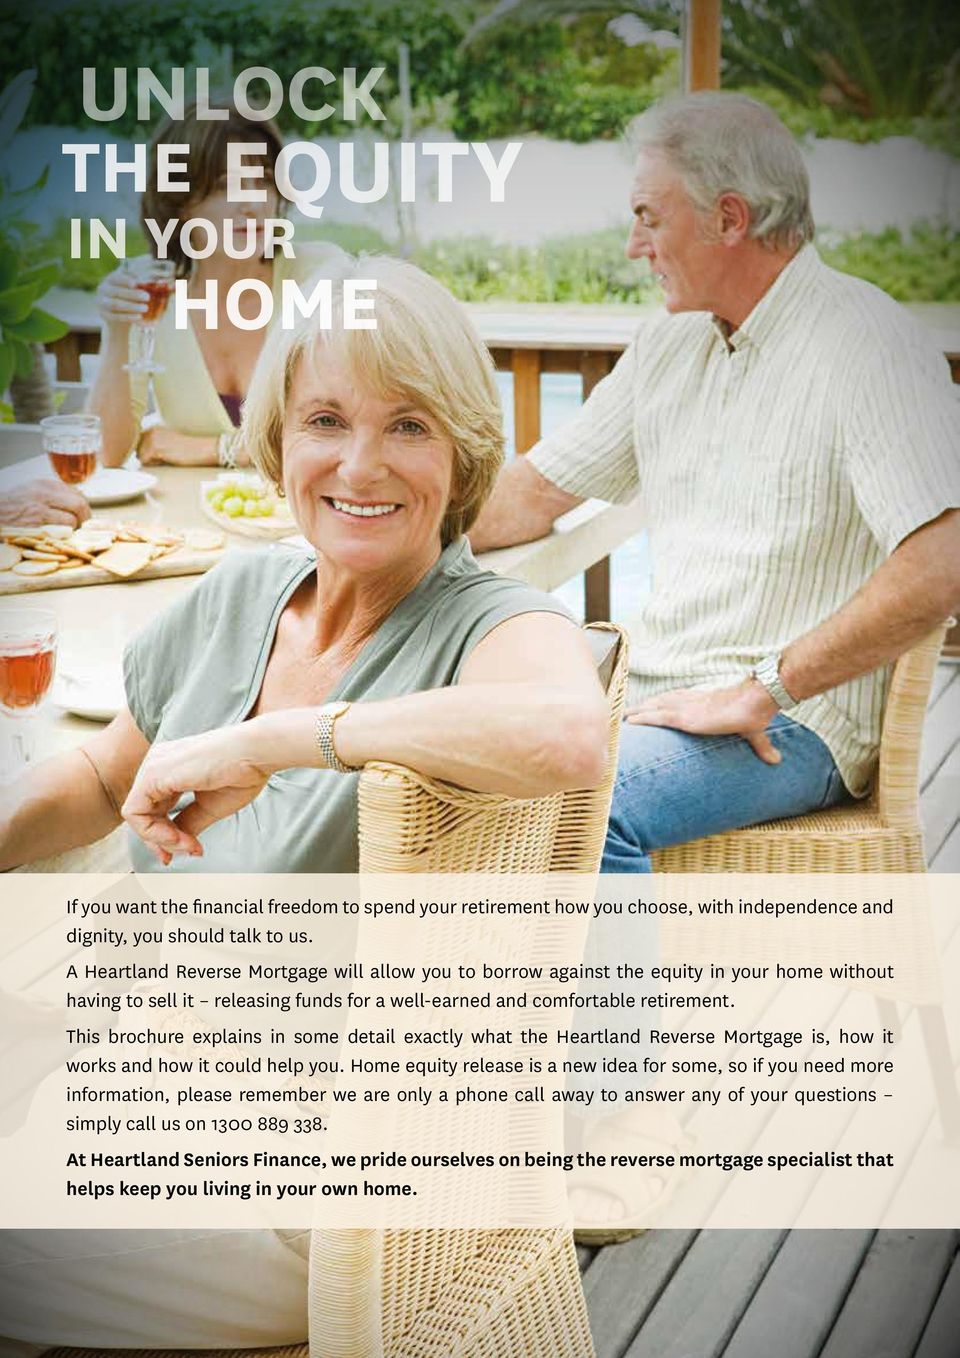 This brochure explains in some detail exactly what the Heartland Reverse Mortgage is, how it works and how it could help you.